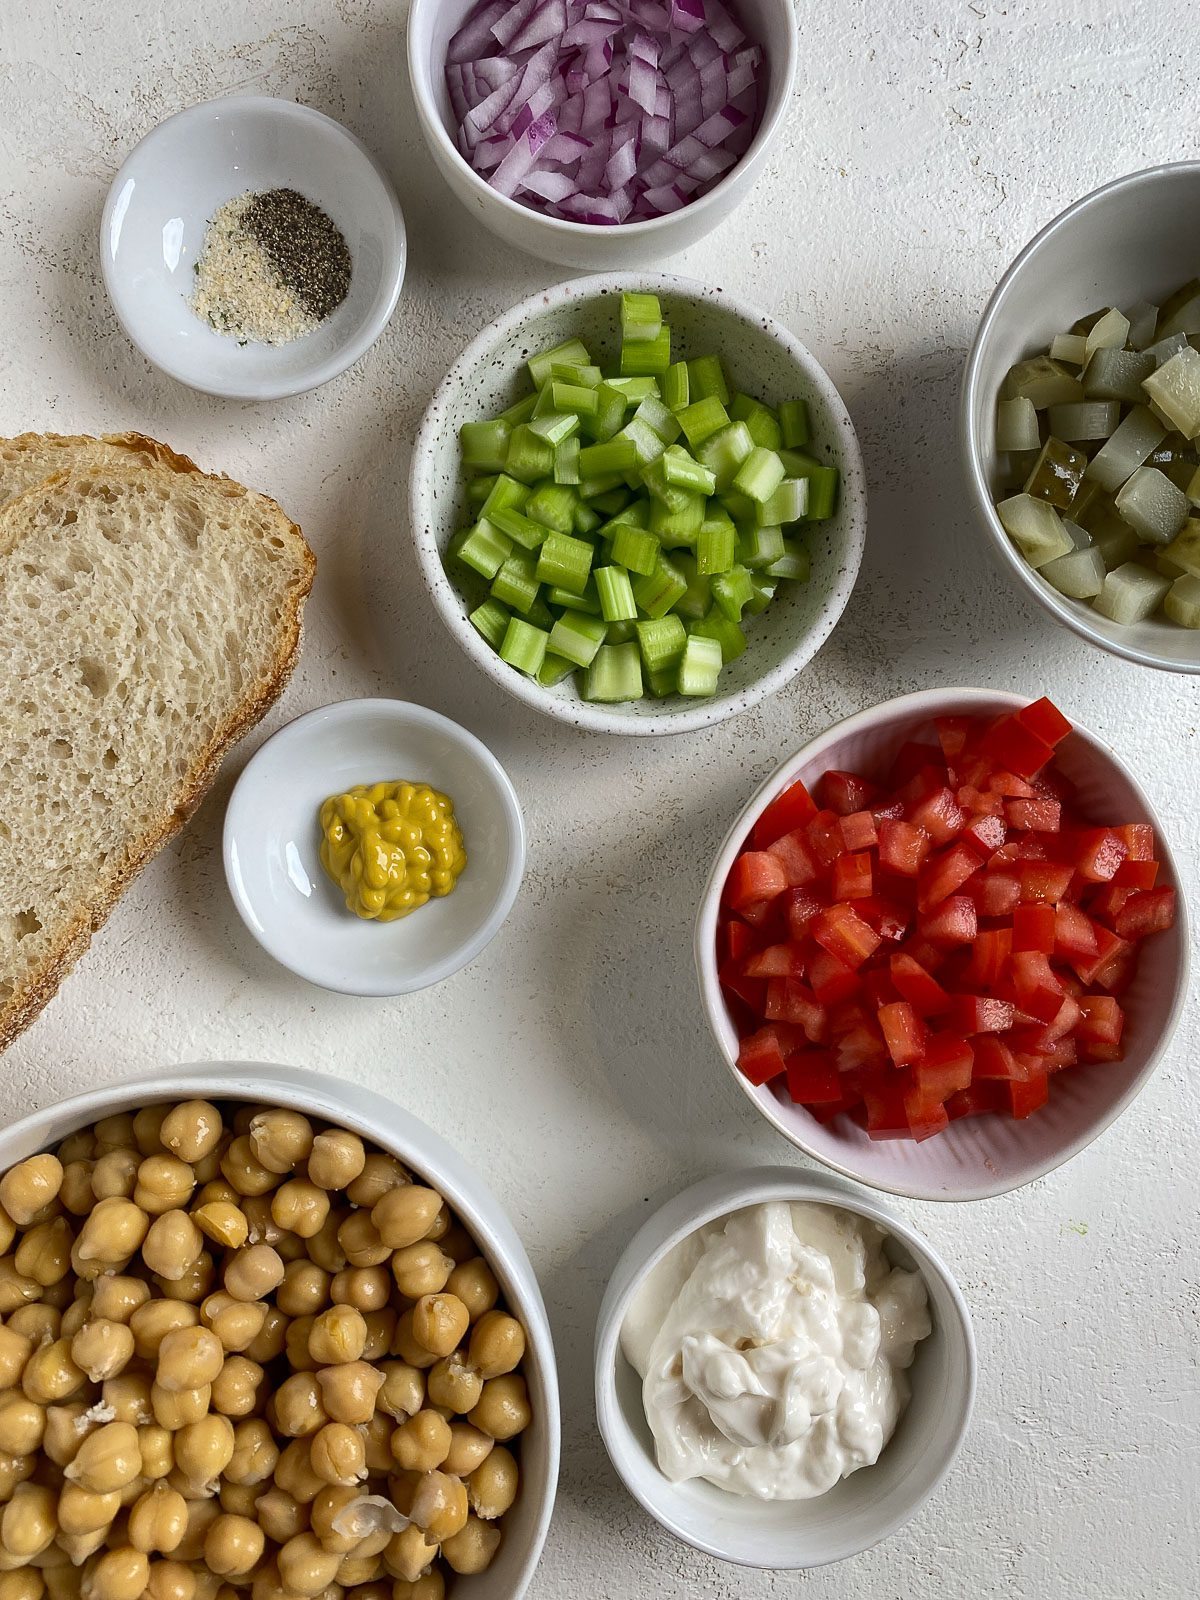 ingredients for Vegan Chickpea Salad Sandwich measured out against a white surface